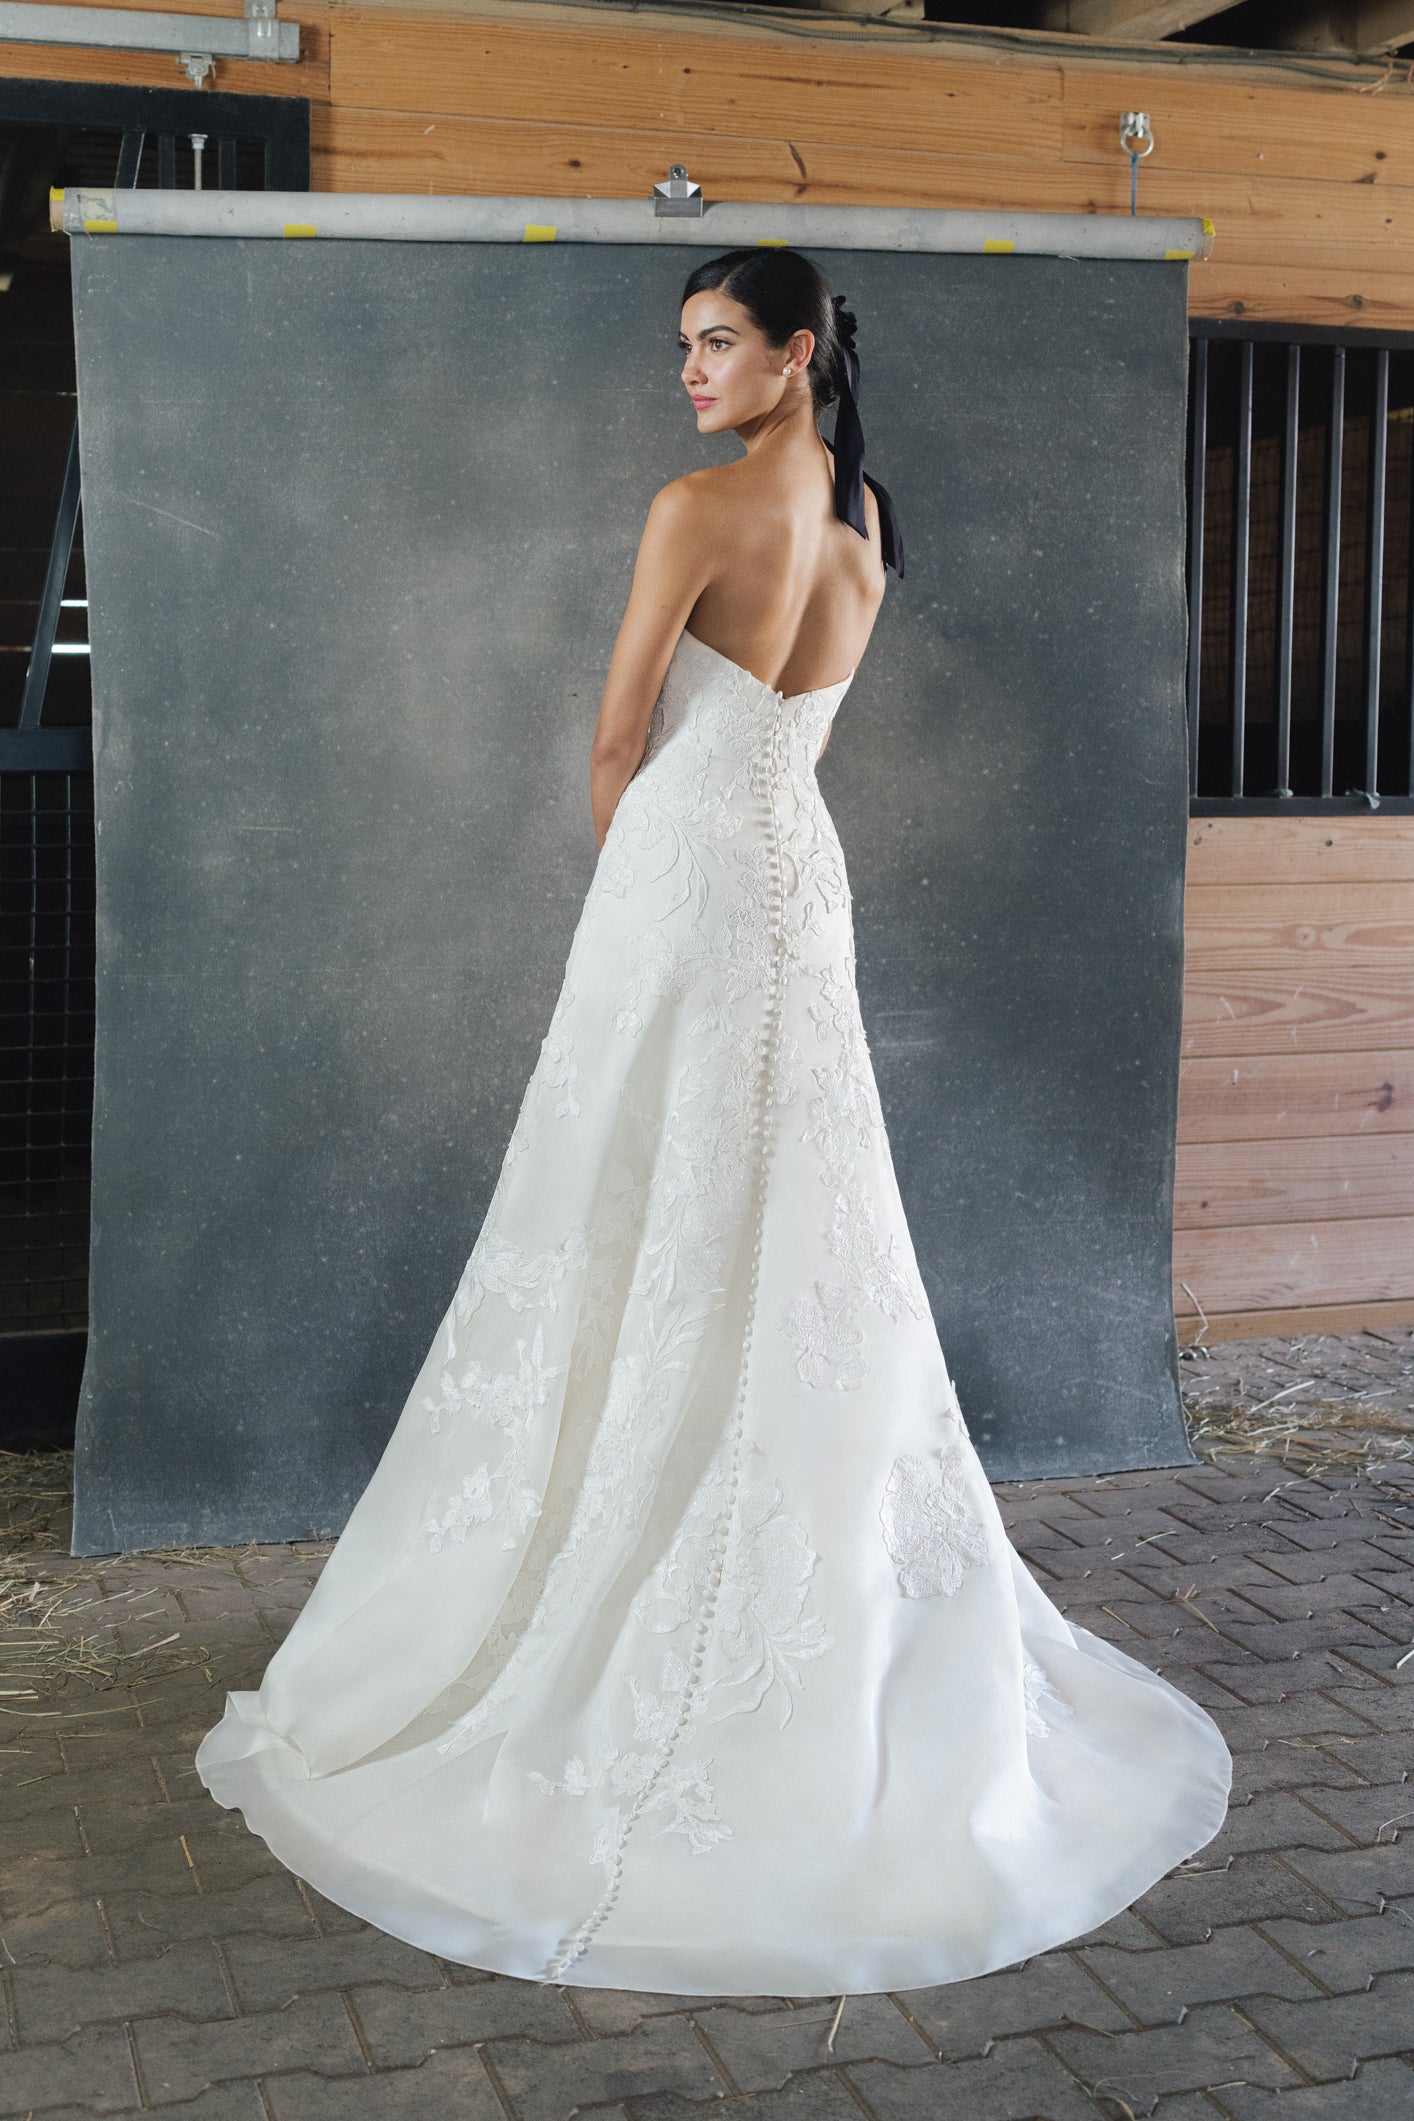 Romantic Sweetheart Strapless Gown by Anne Barge - Image 2